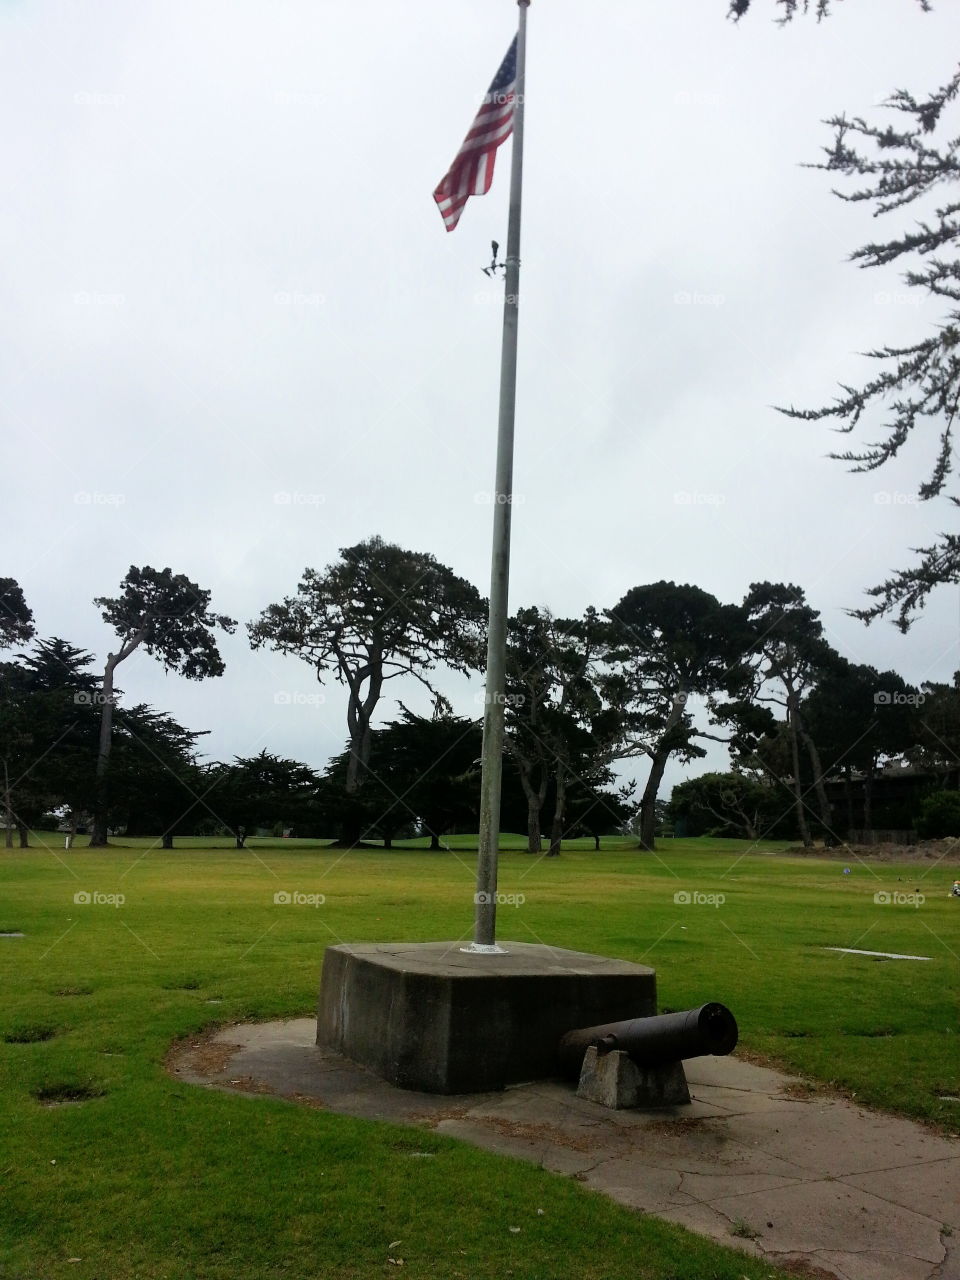 American flag mast with cannon. At a military cemetery in Pacific Grove, CA.